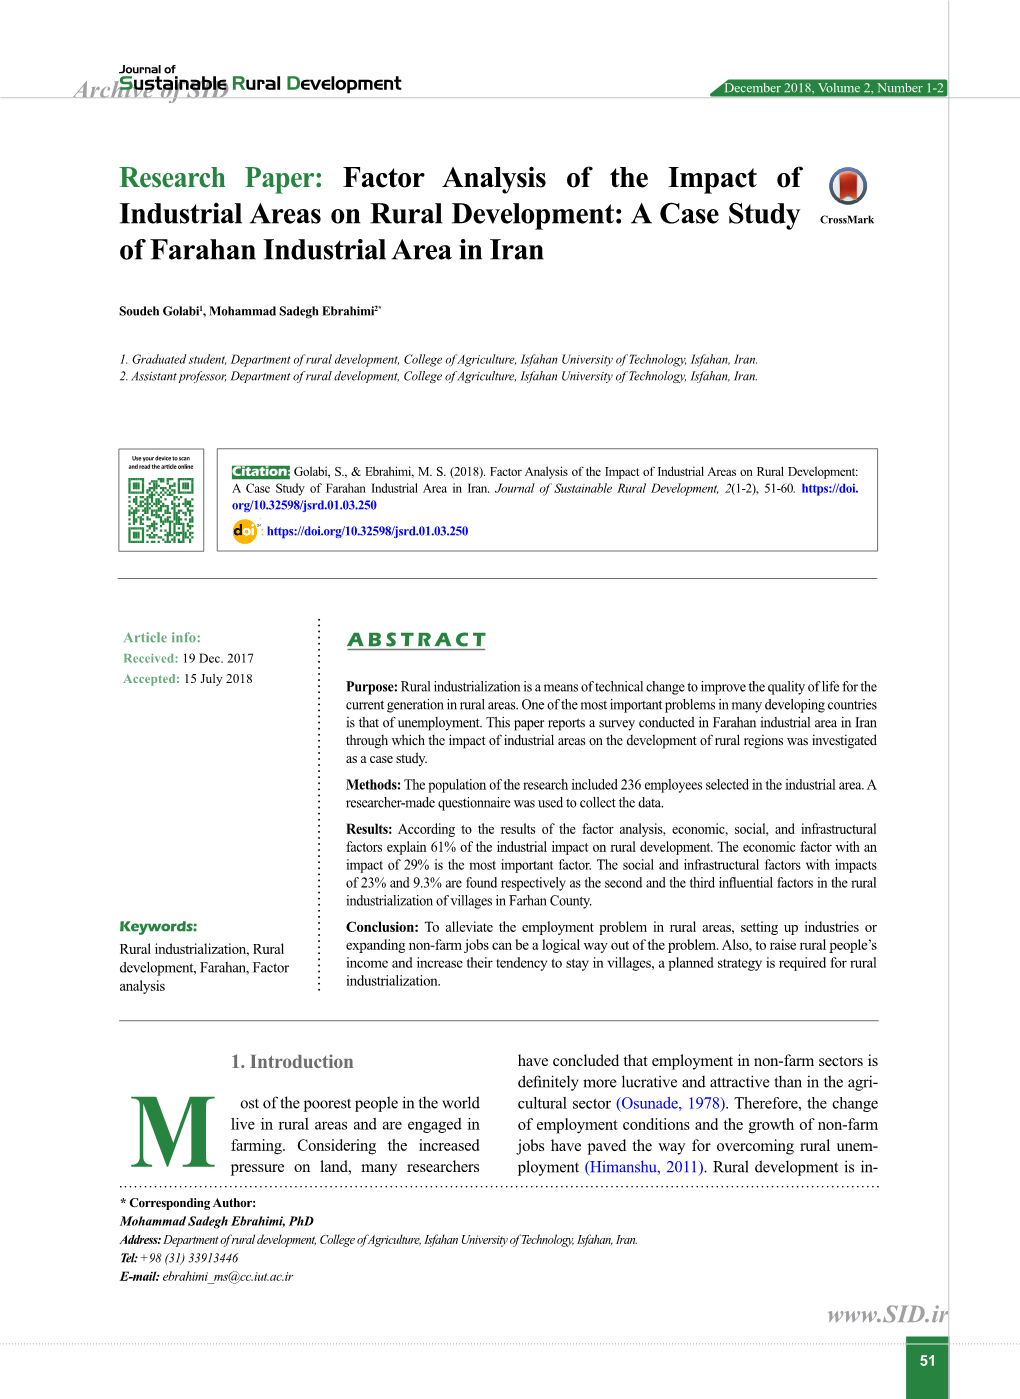 Factor Analysis of the Impact of Industrial Areas on Rural Development: a Case Study Crossmark of Farahan Industrial Area in Iran